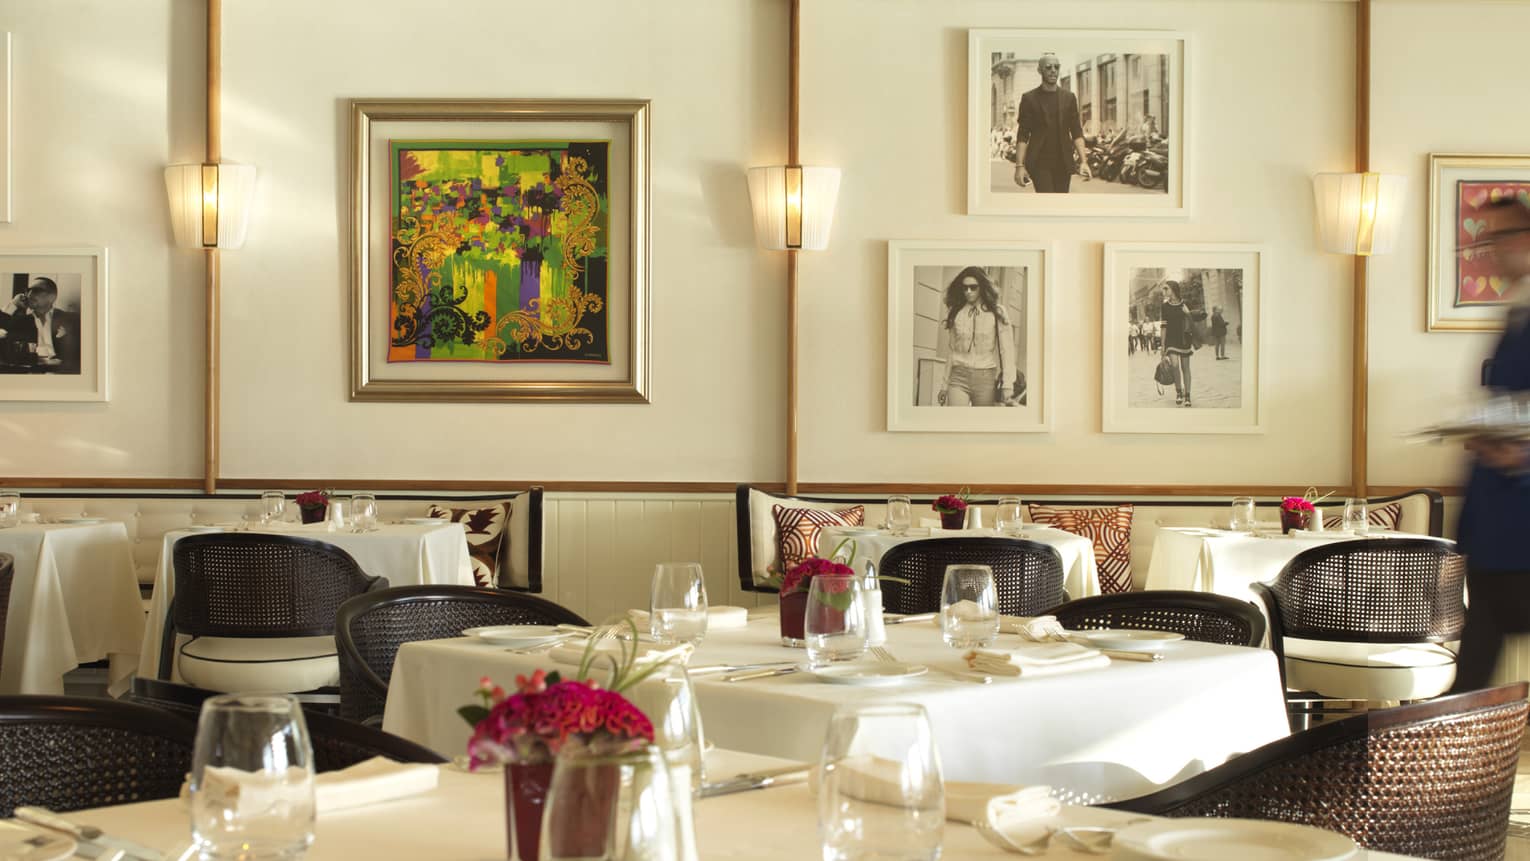 Server in blue suit walks through Cafe Milano dining room with elegant white dining tables, colourful art, framed black-and-white photos